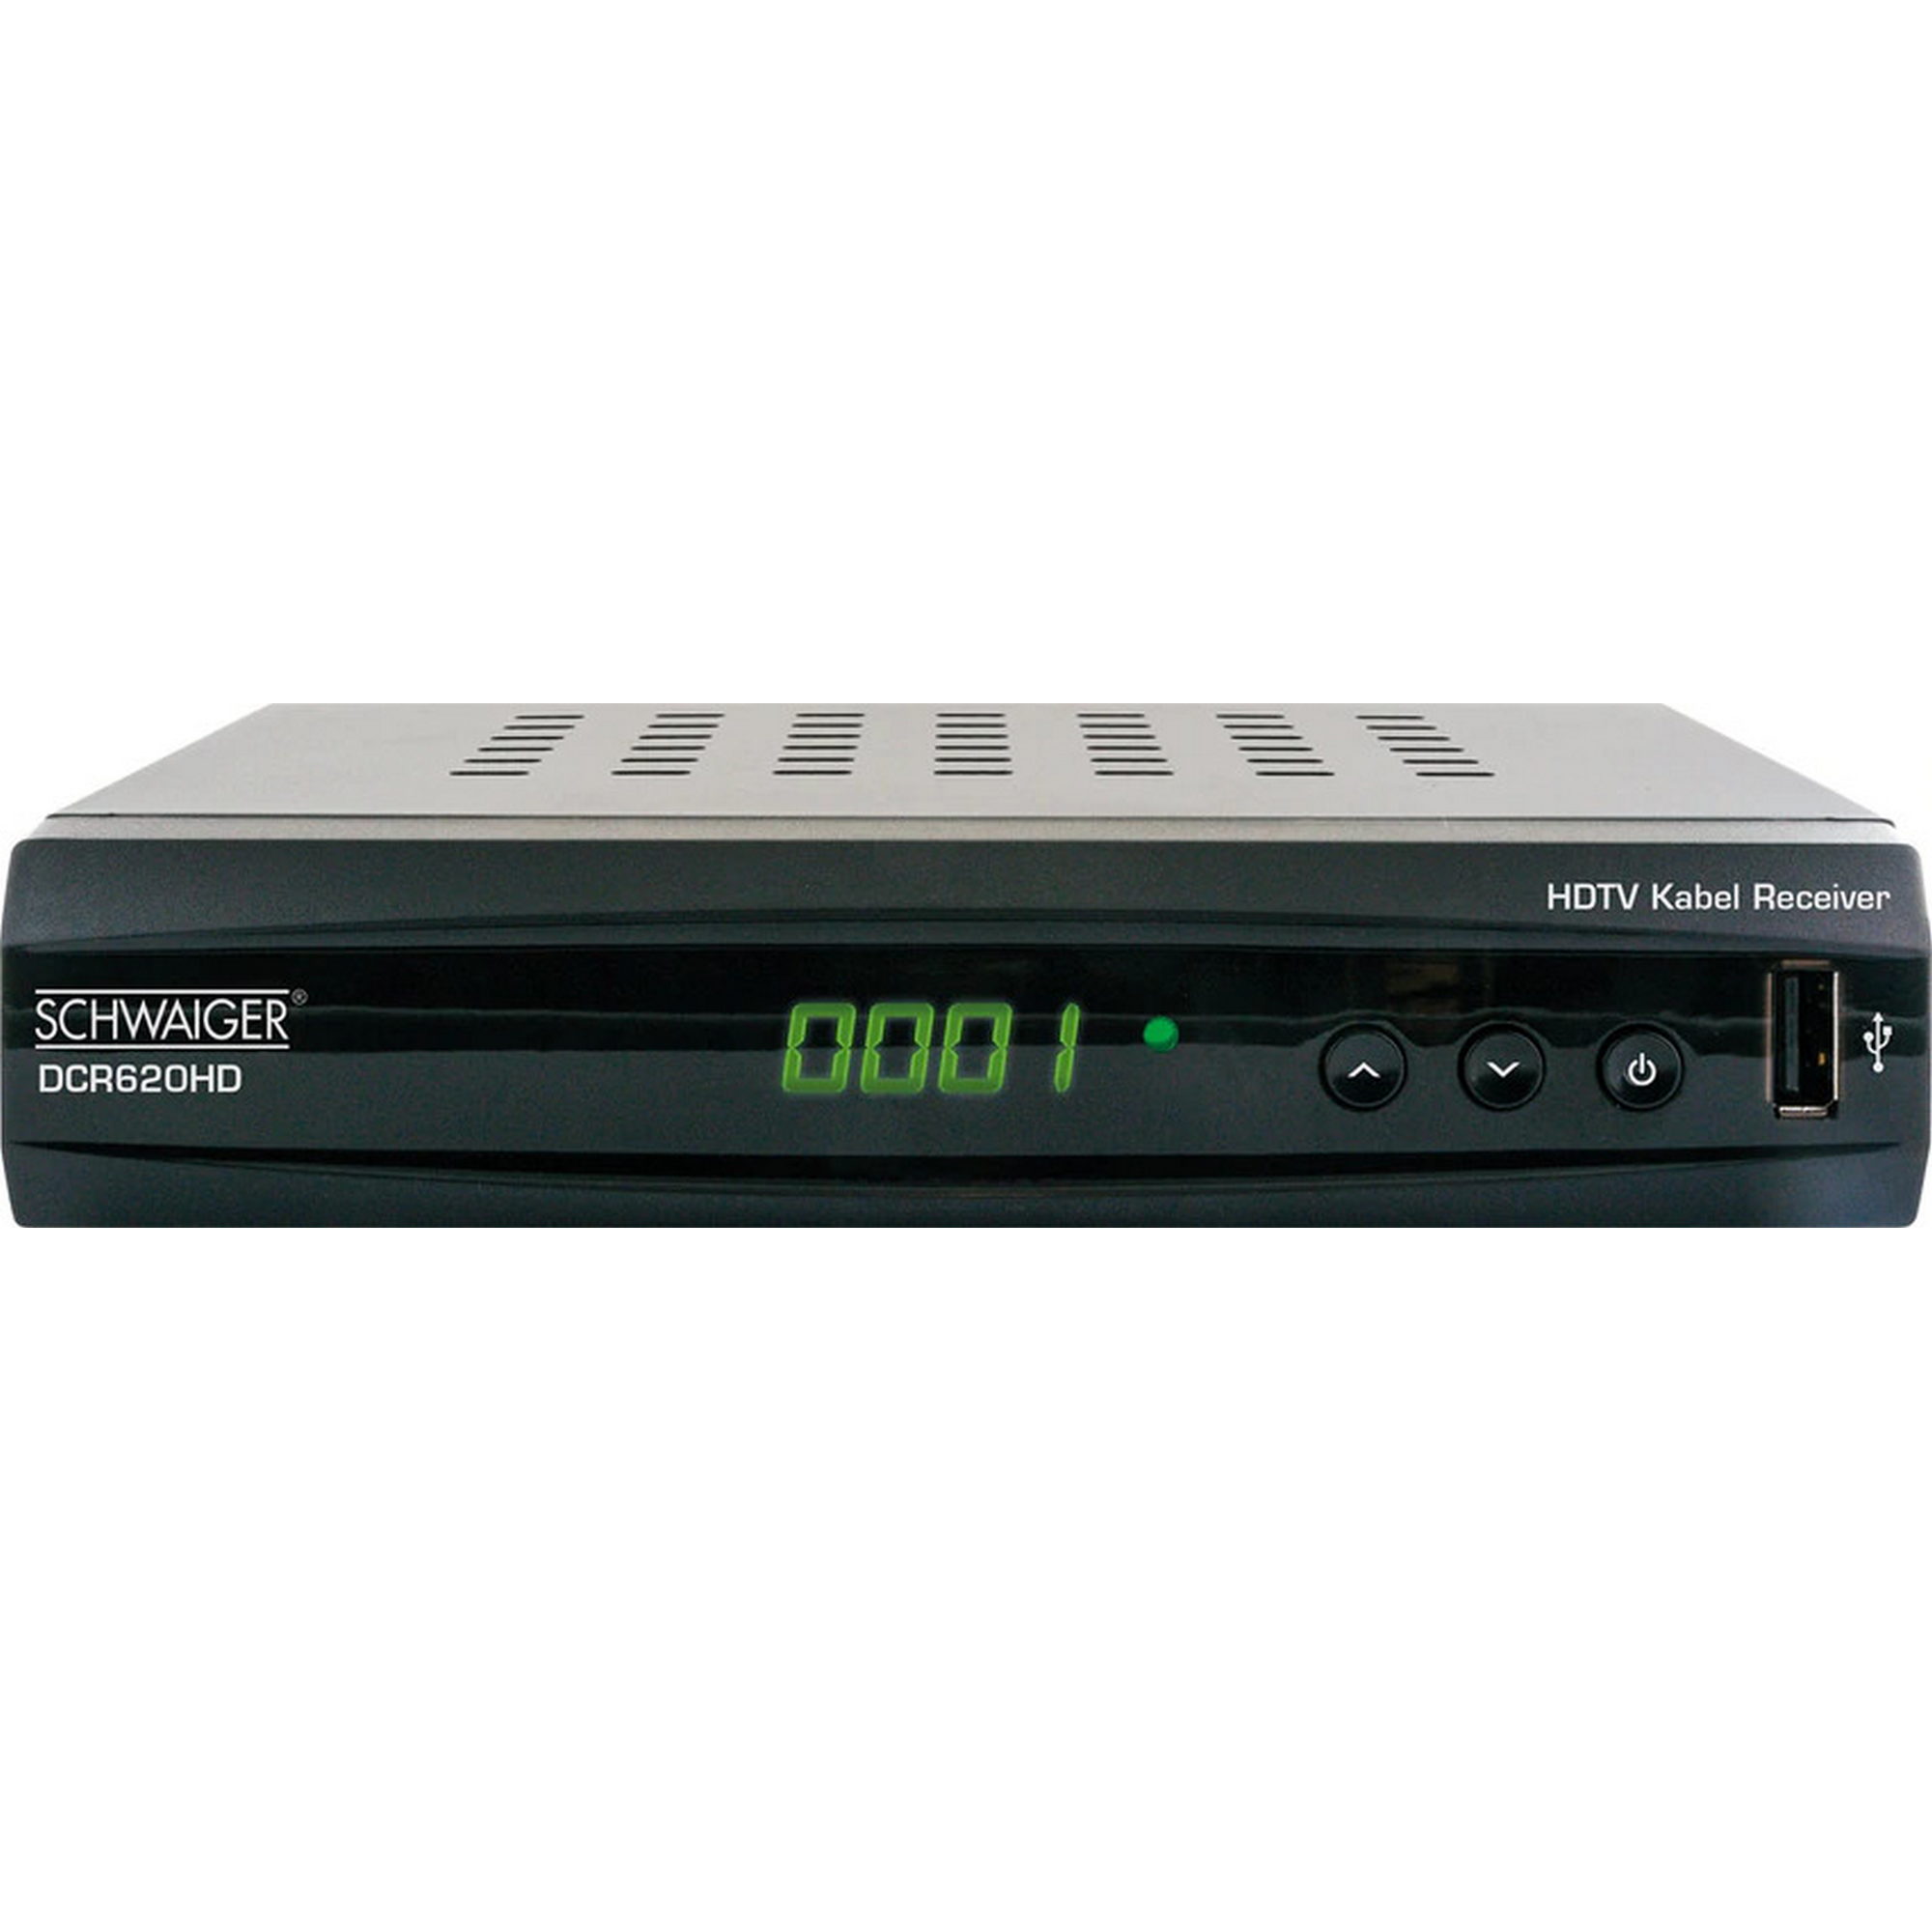 Full HD Kabelreceiver schwarz, LED Anzeige + product picture